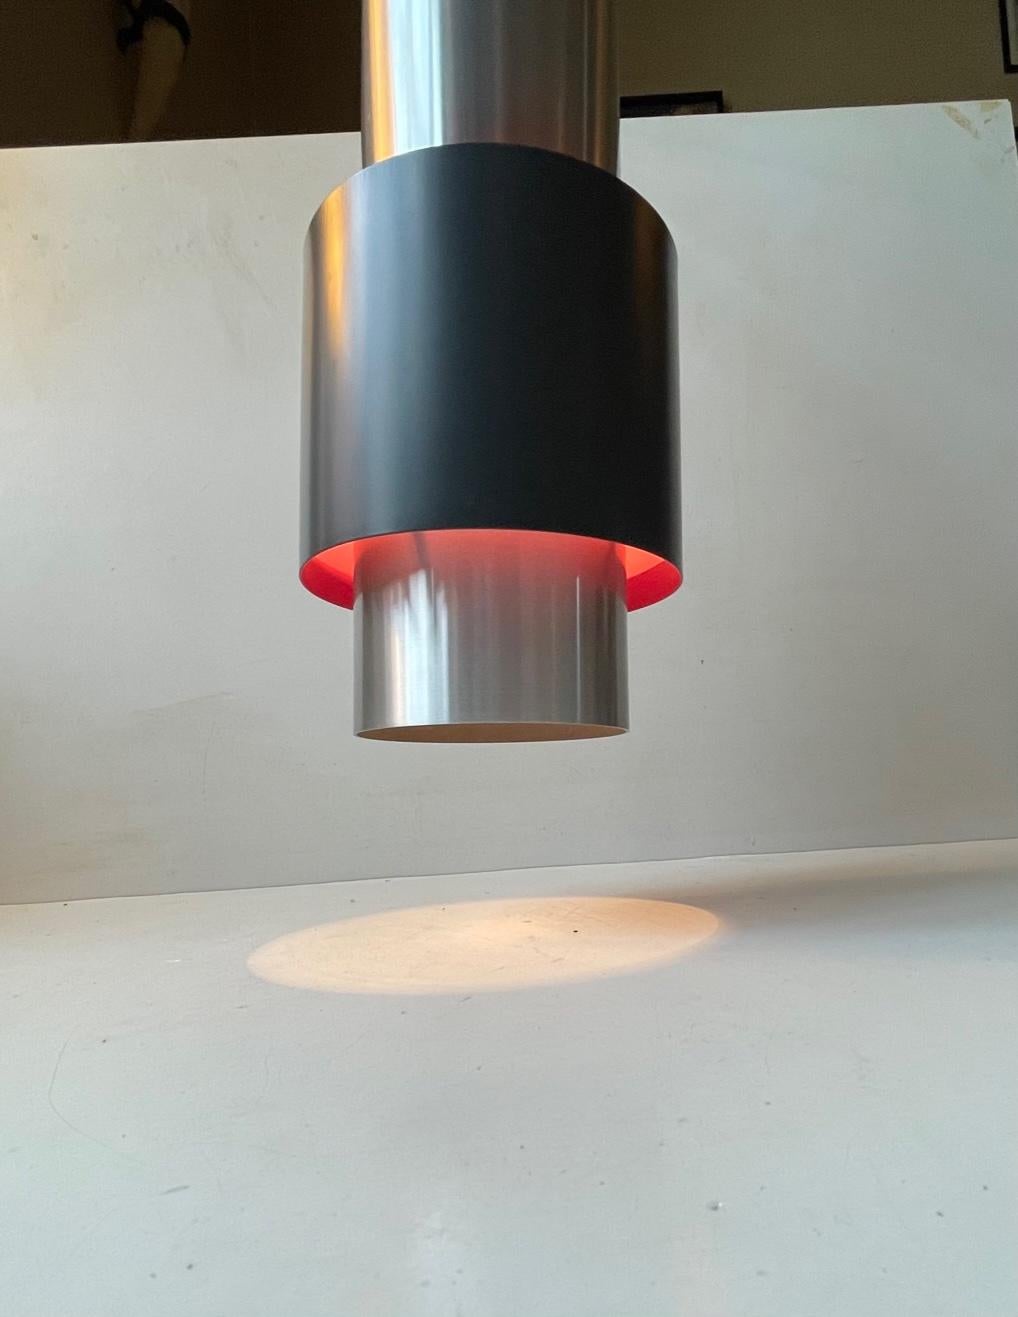 Large cylindrical space age pendant lamp made from brushed aluminium set with a slate black shade with purple interior. This purple turns in to pink when lid. Its called Zenith and was designed by Jo Hammerborg and manufactured by Fog & Mørup in